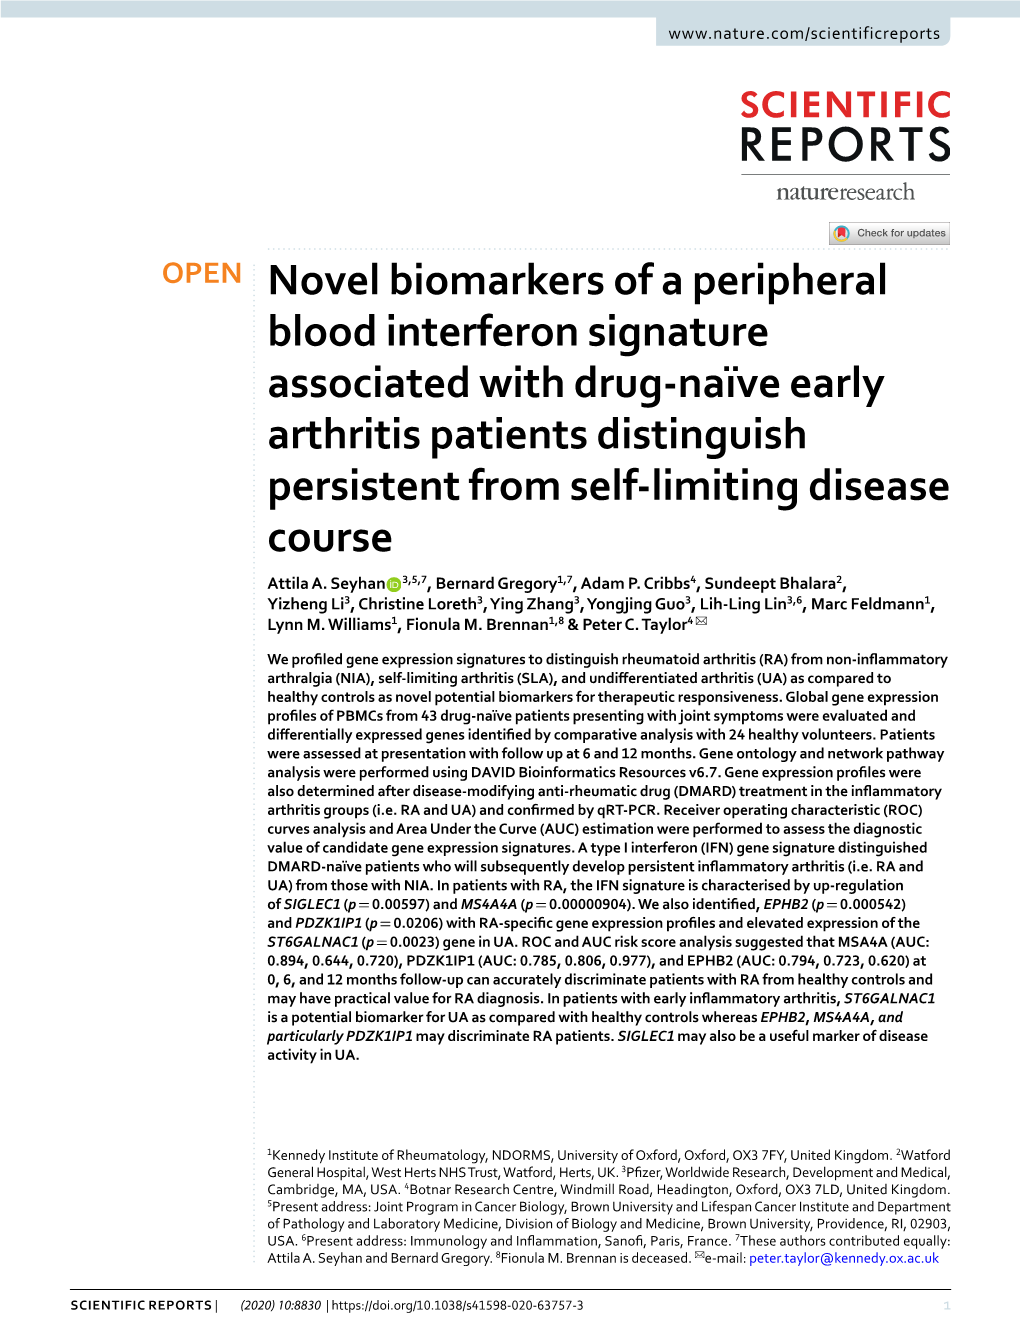 Novel Biomarkers of a Peripheral Blood Interferon Signature Associated with Drug-Naïve Early Arthritis Patients Distinguish